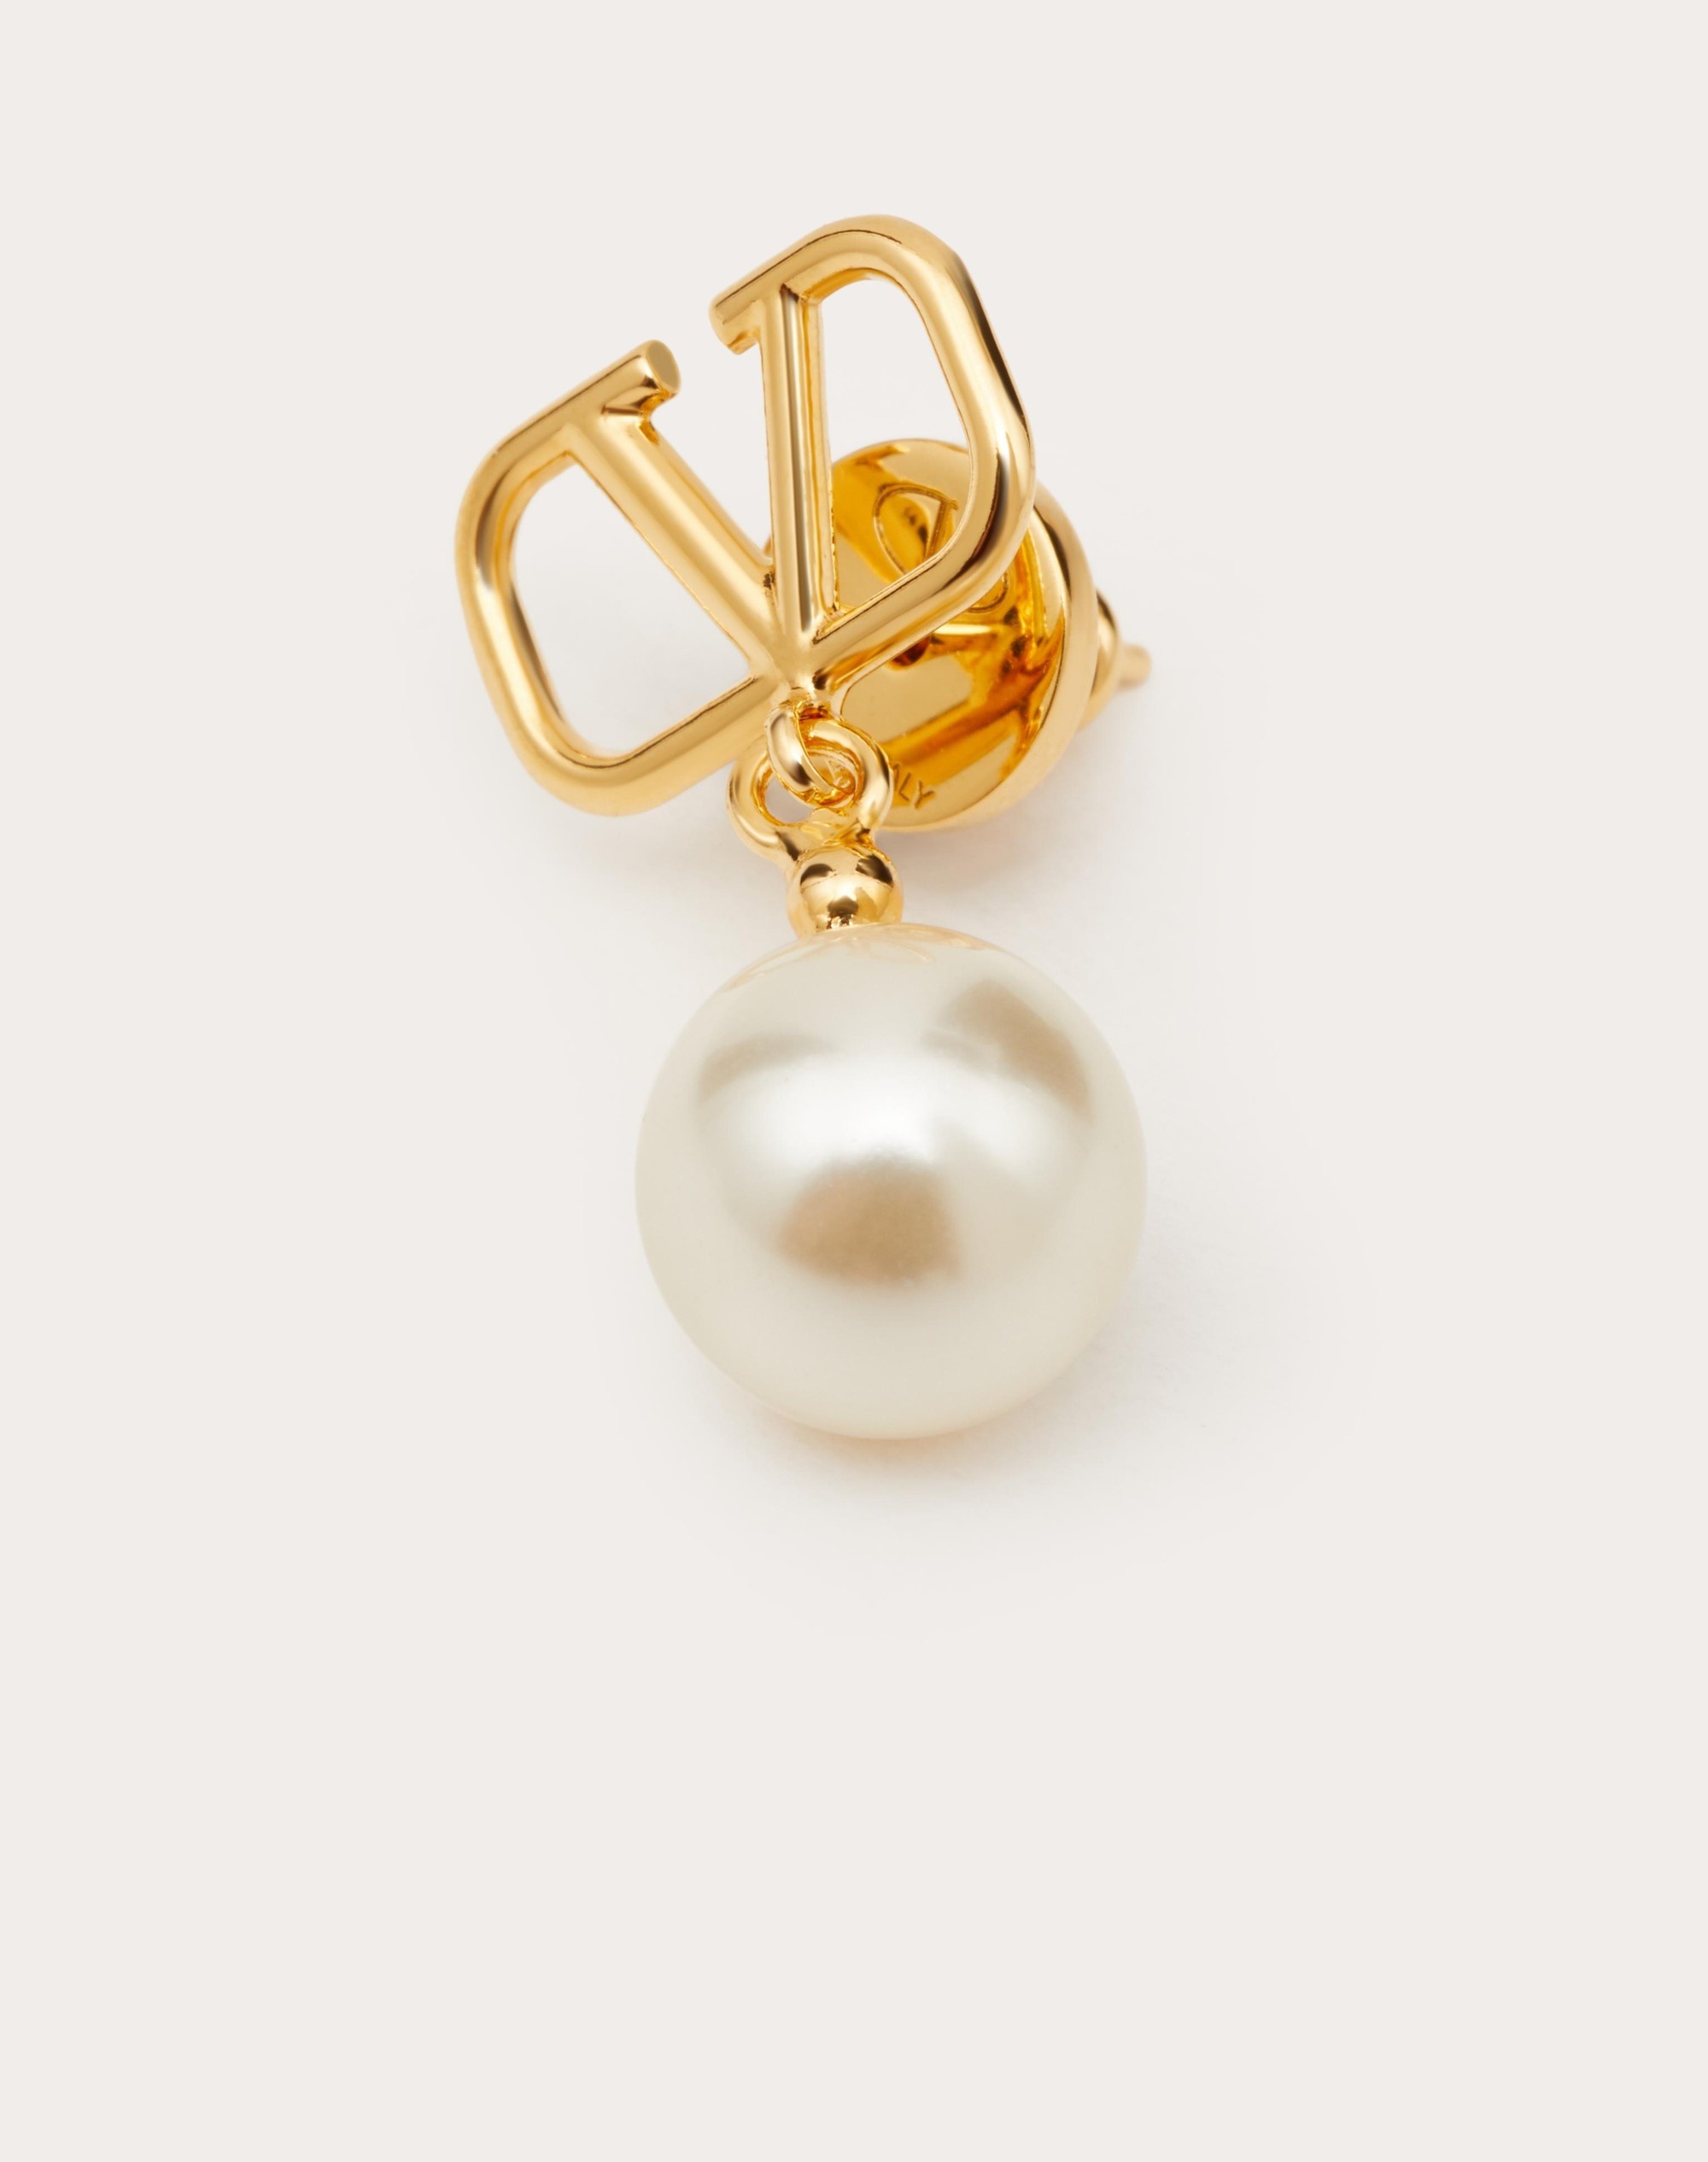 VLOGO SIGNATURE EARRINGS WITH SWAROVSKI® PEARLS - 2